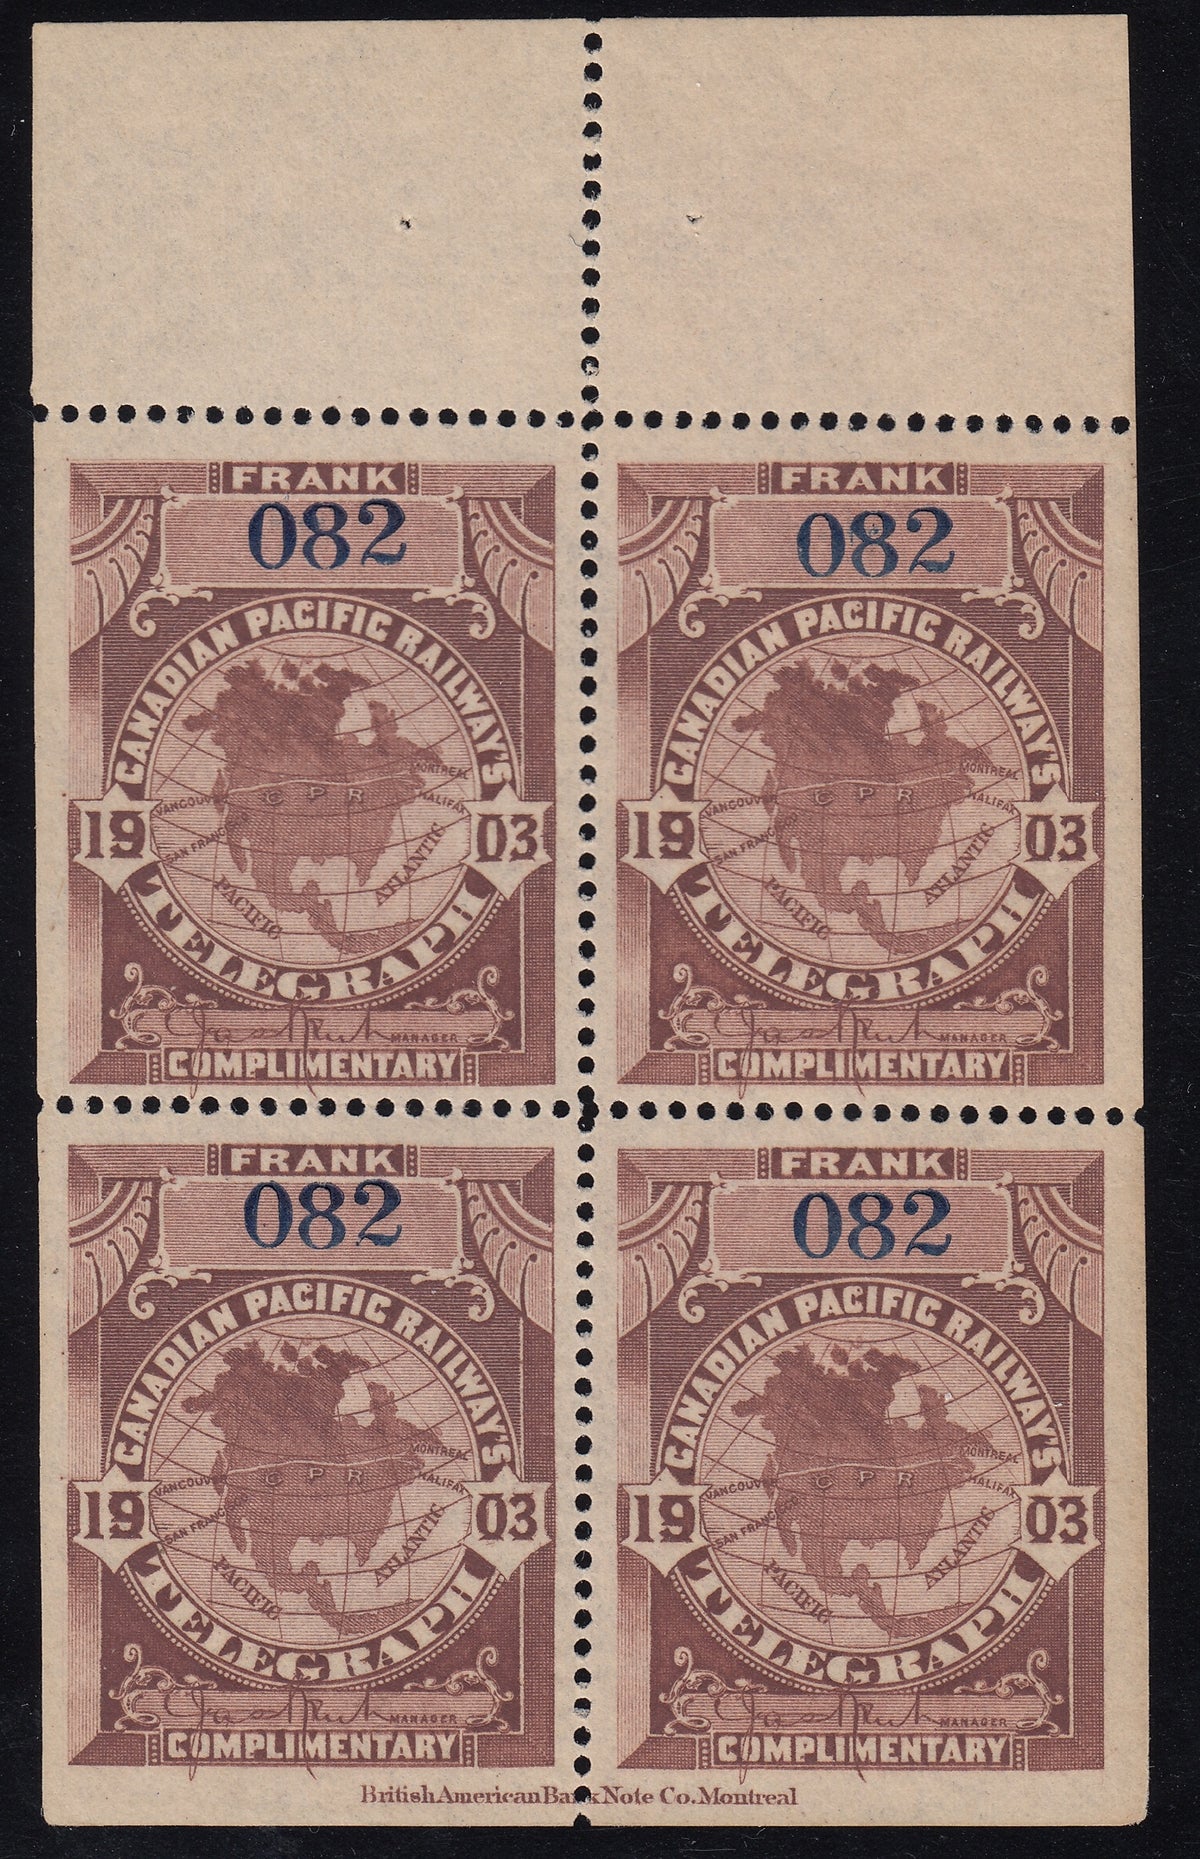 0016CP1712 - TCP16 - Mint Booklet Pane